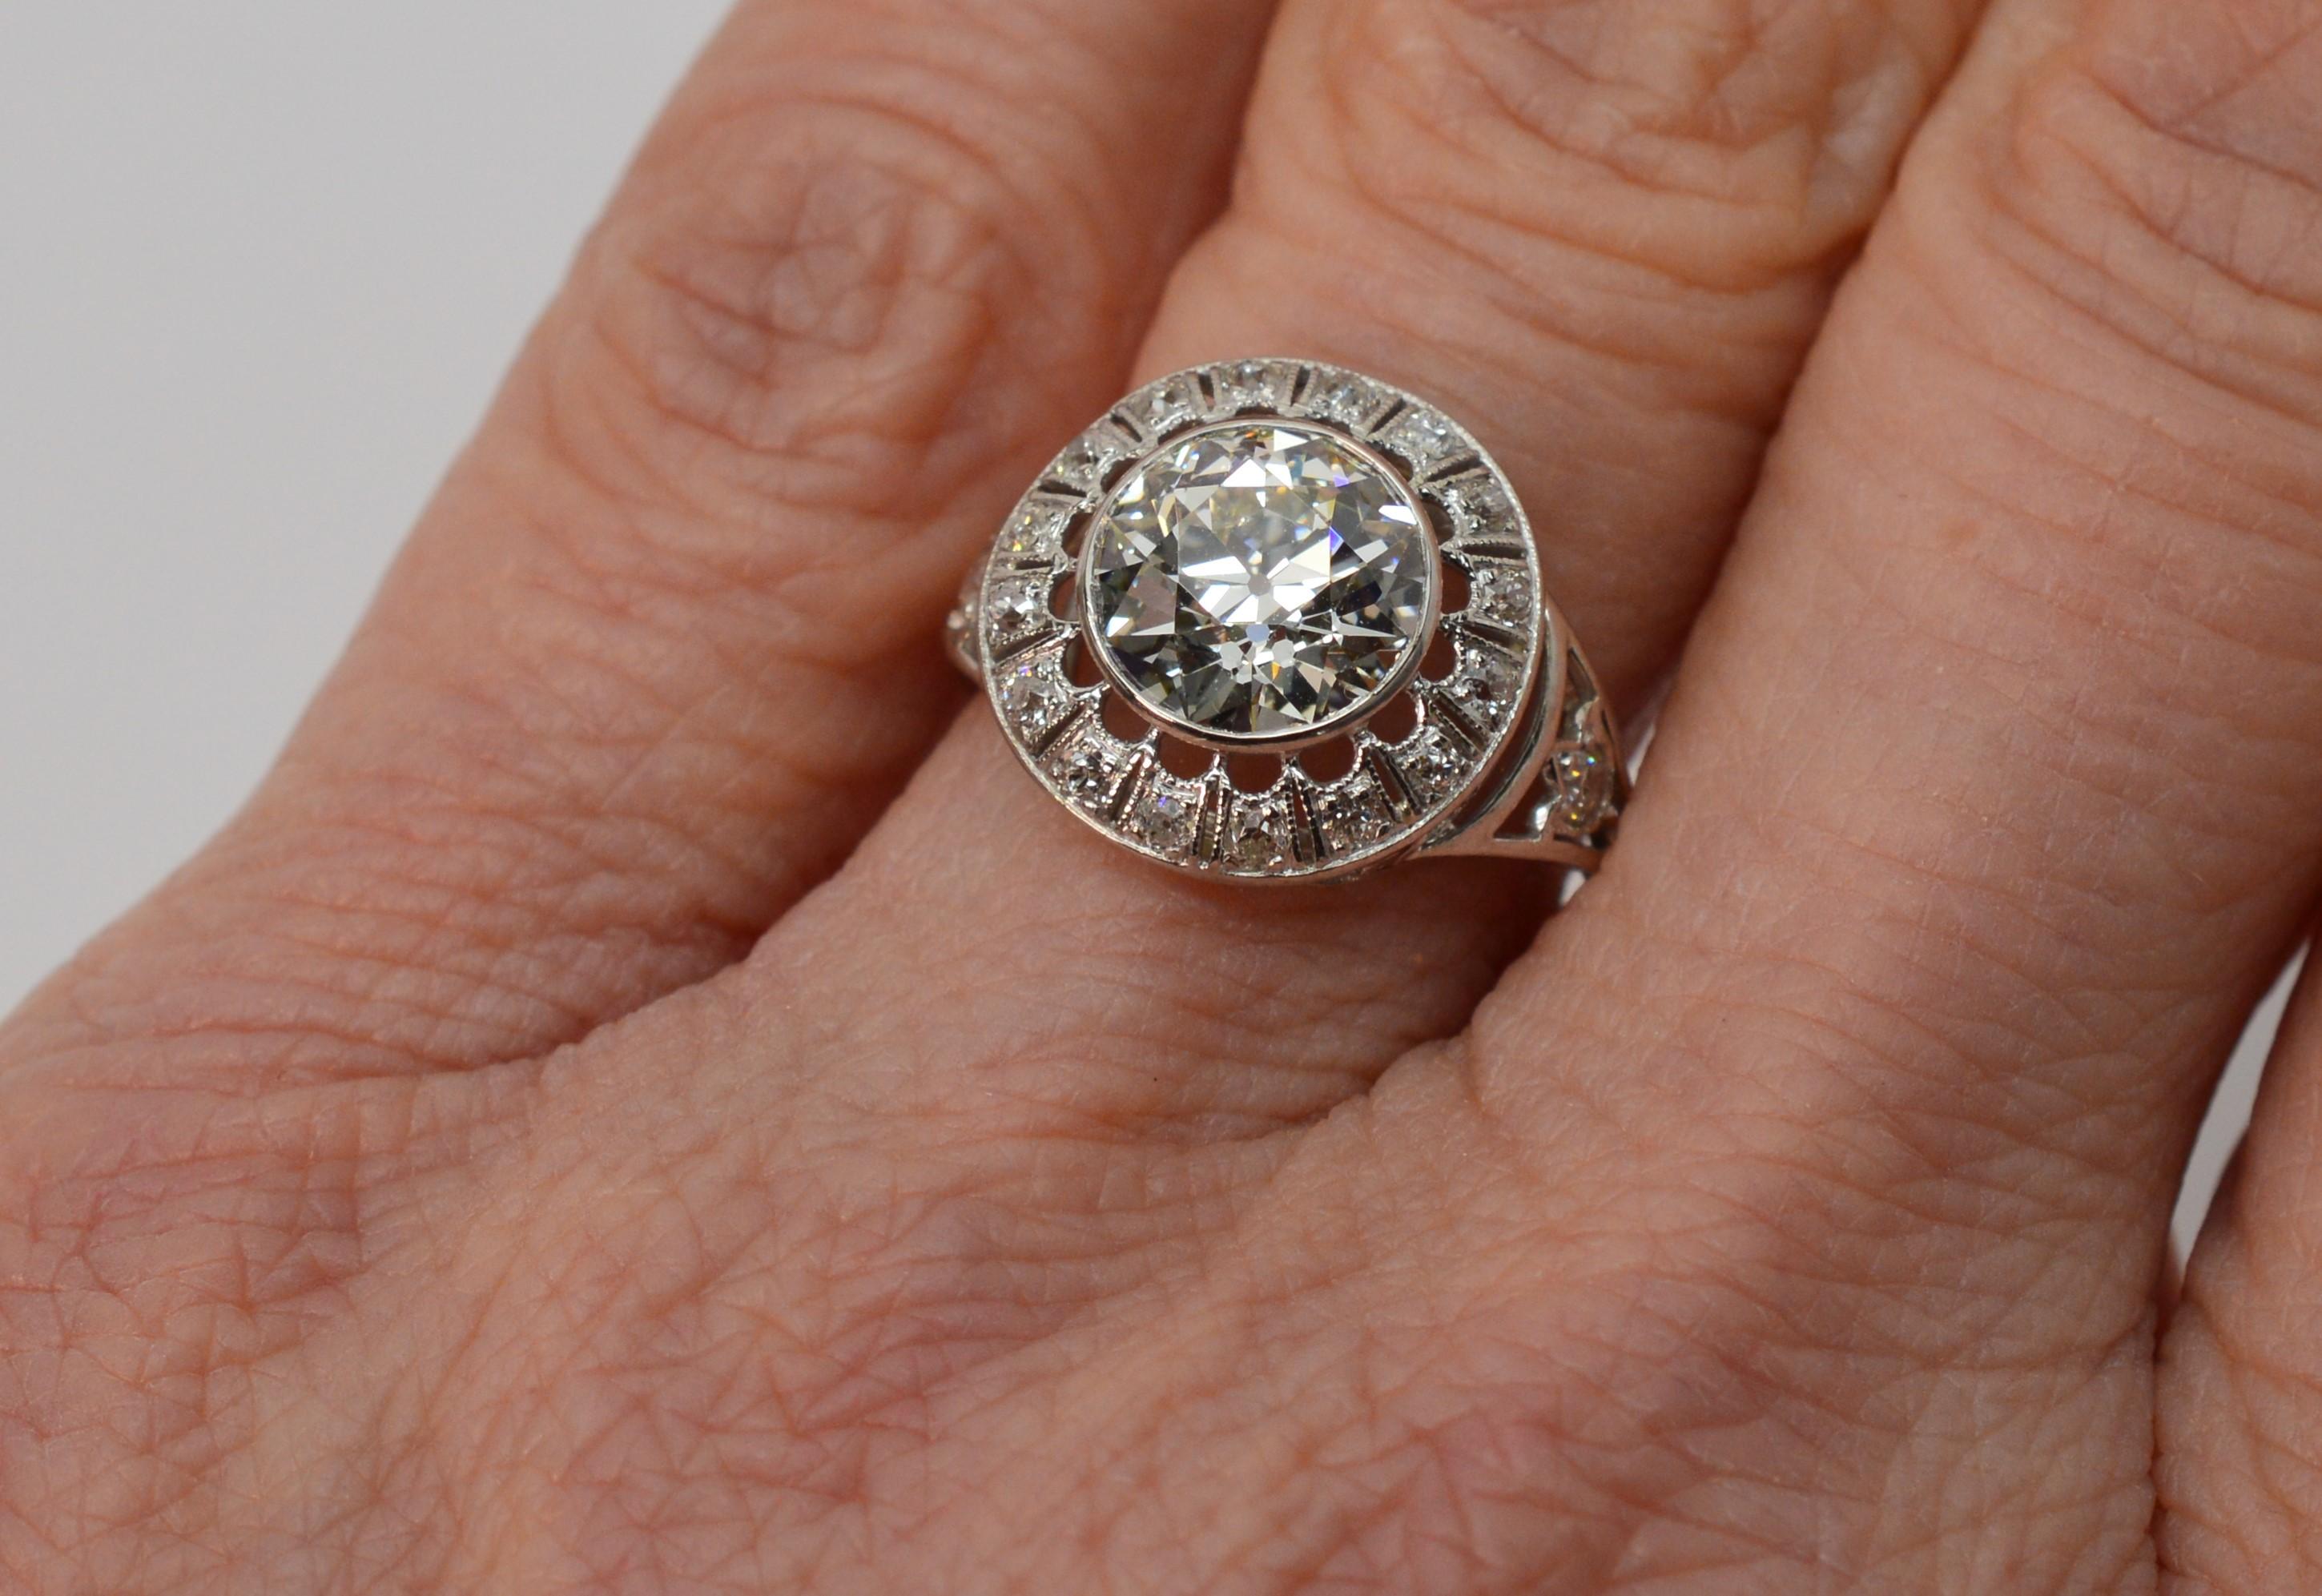 Exquisite antique Old European brilliant cut 2.25 carat diamond ring presents as an outstanding engagement ring or extraordinary personal fine jewelry piece for that special someone. 
The elegant Edwardian style setting in platinum beautifully hosts